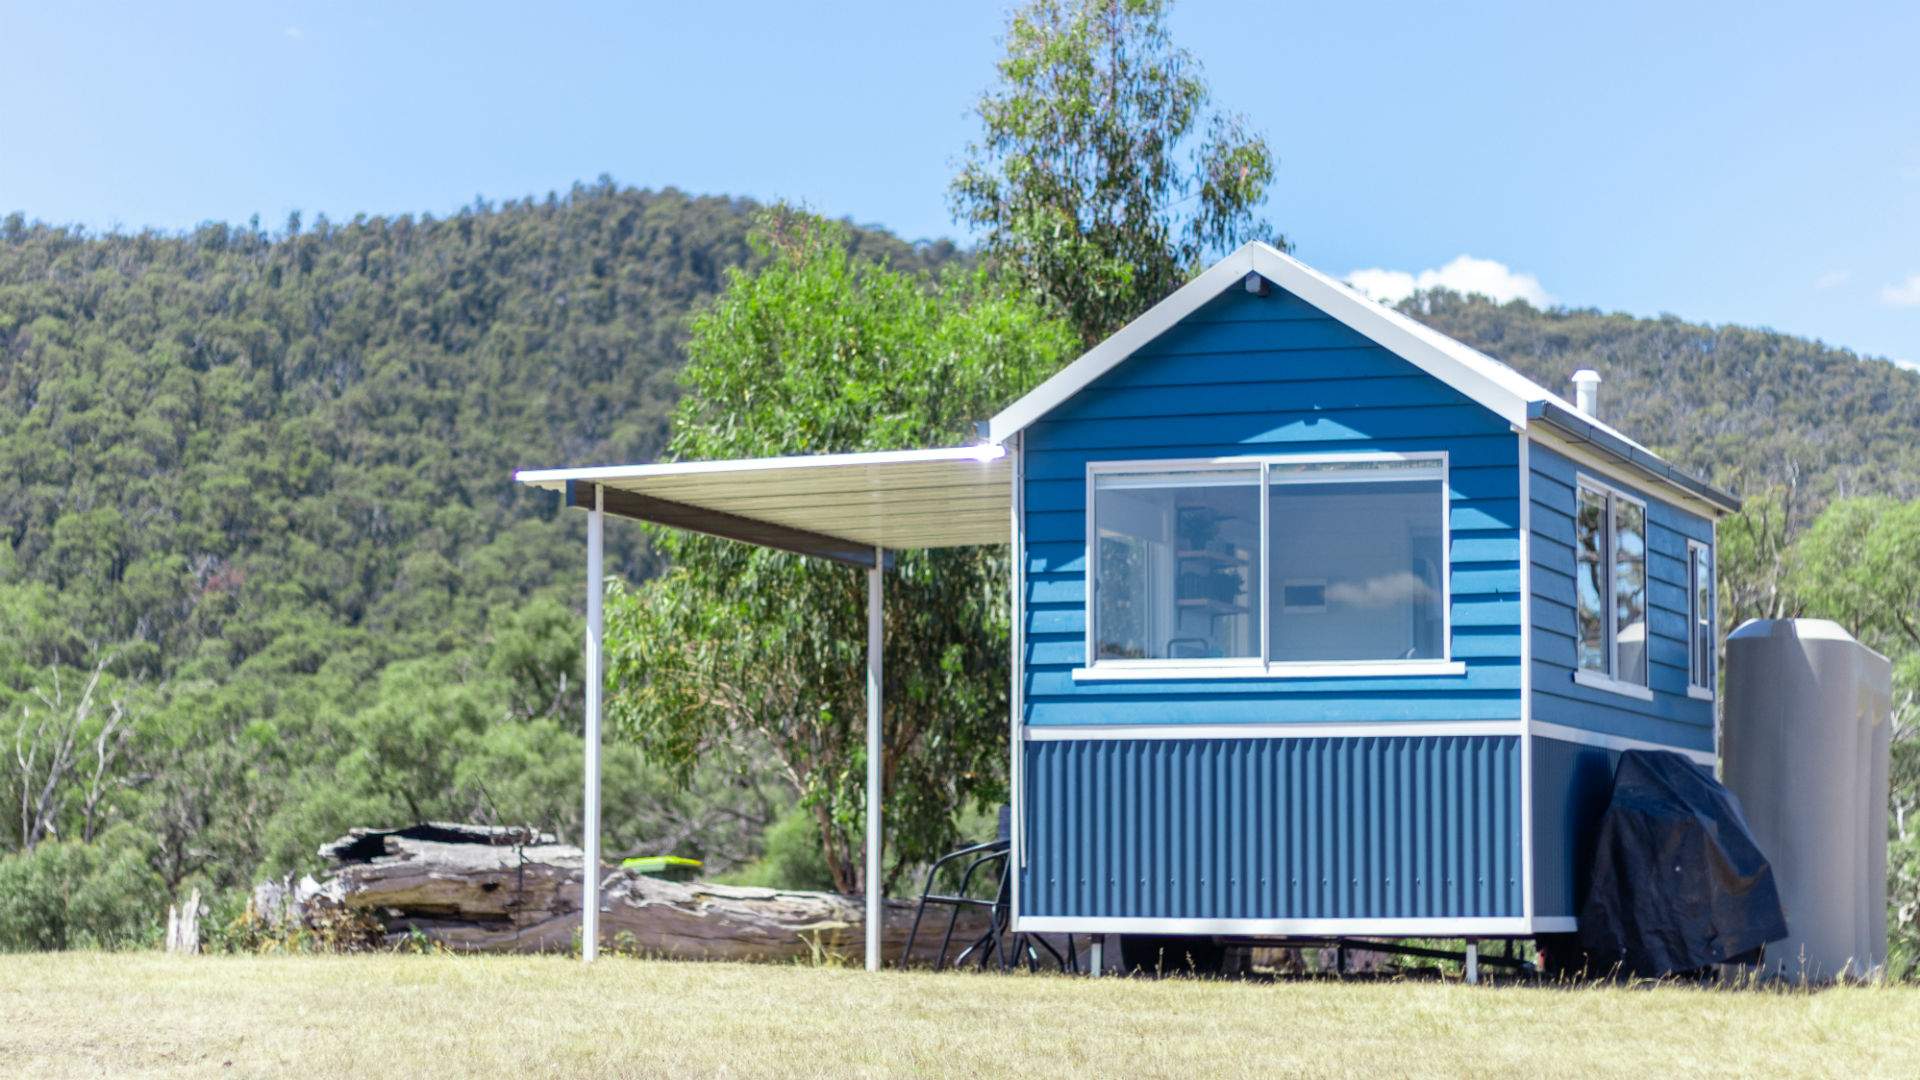 This Secluded Tiny House in the Yarra Valley Is Your New Reason to Get Out of the City